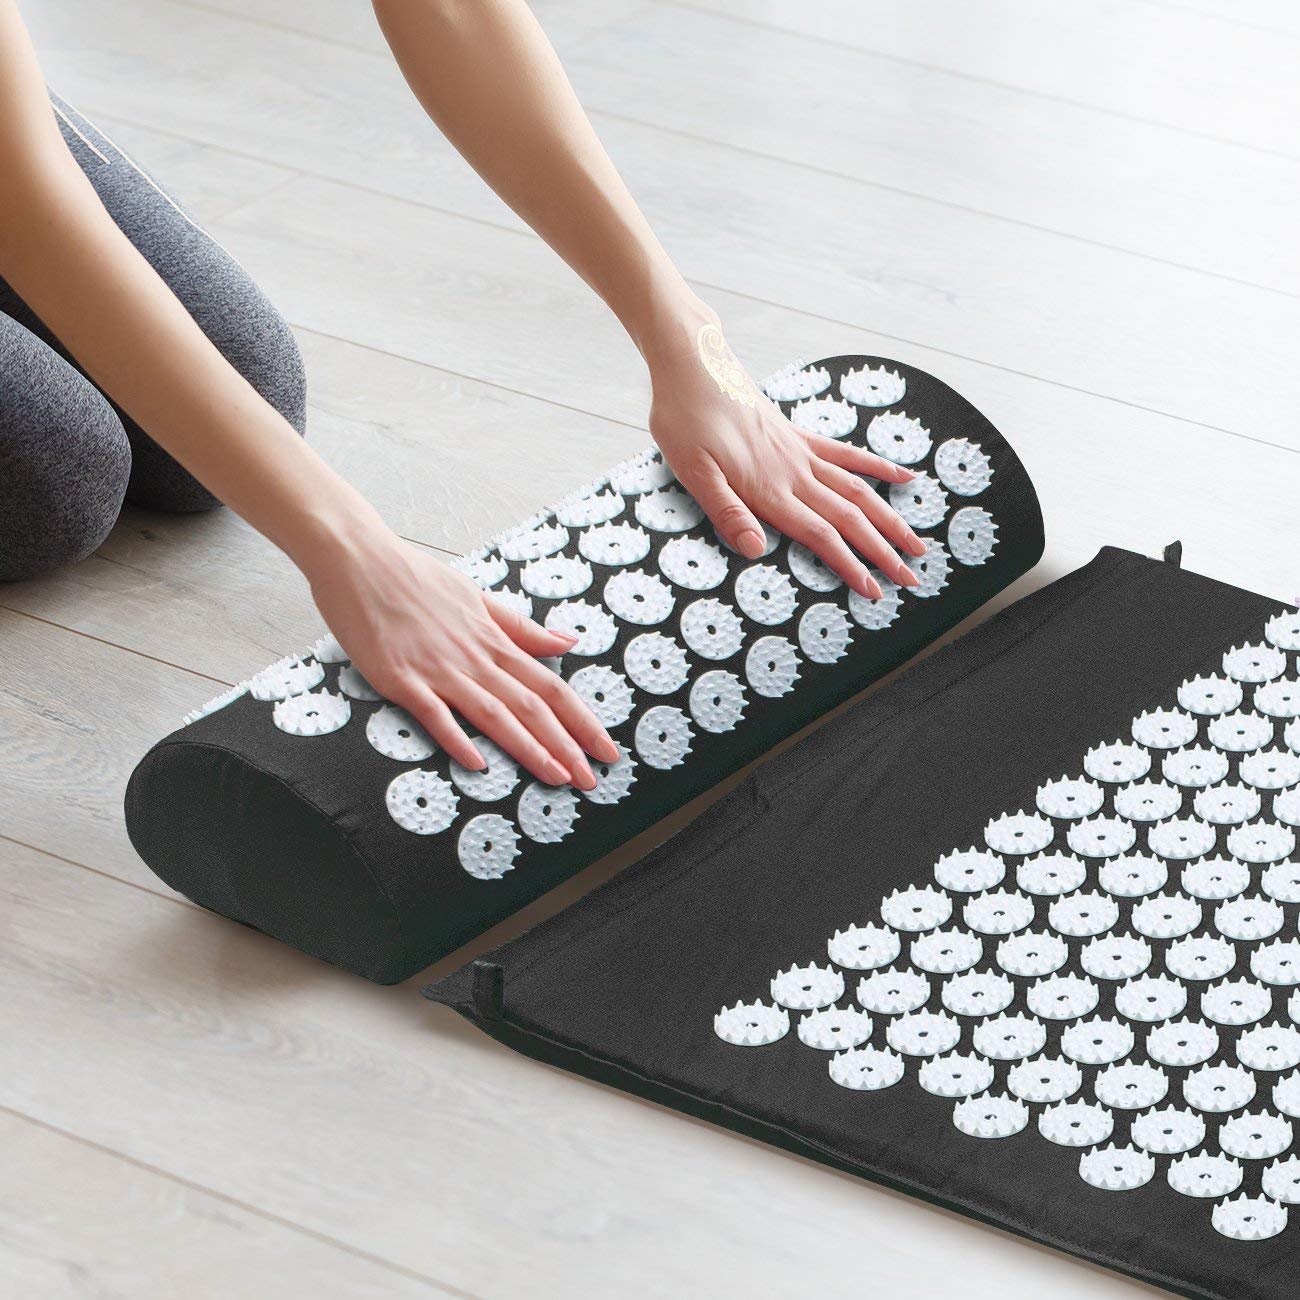 Sivan Back and Neck Pain Relief Acupressure Mat and Pillow Set, Chronic Back Pain Treatment - Relieves Your Stress of Lower Upper Back and Sciatic Pain - Black